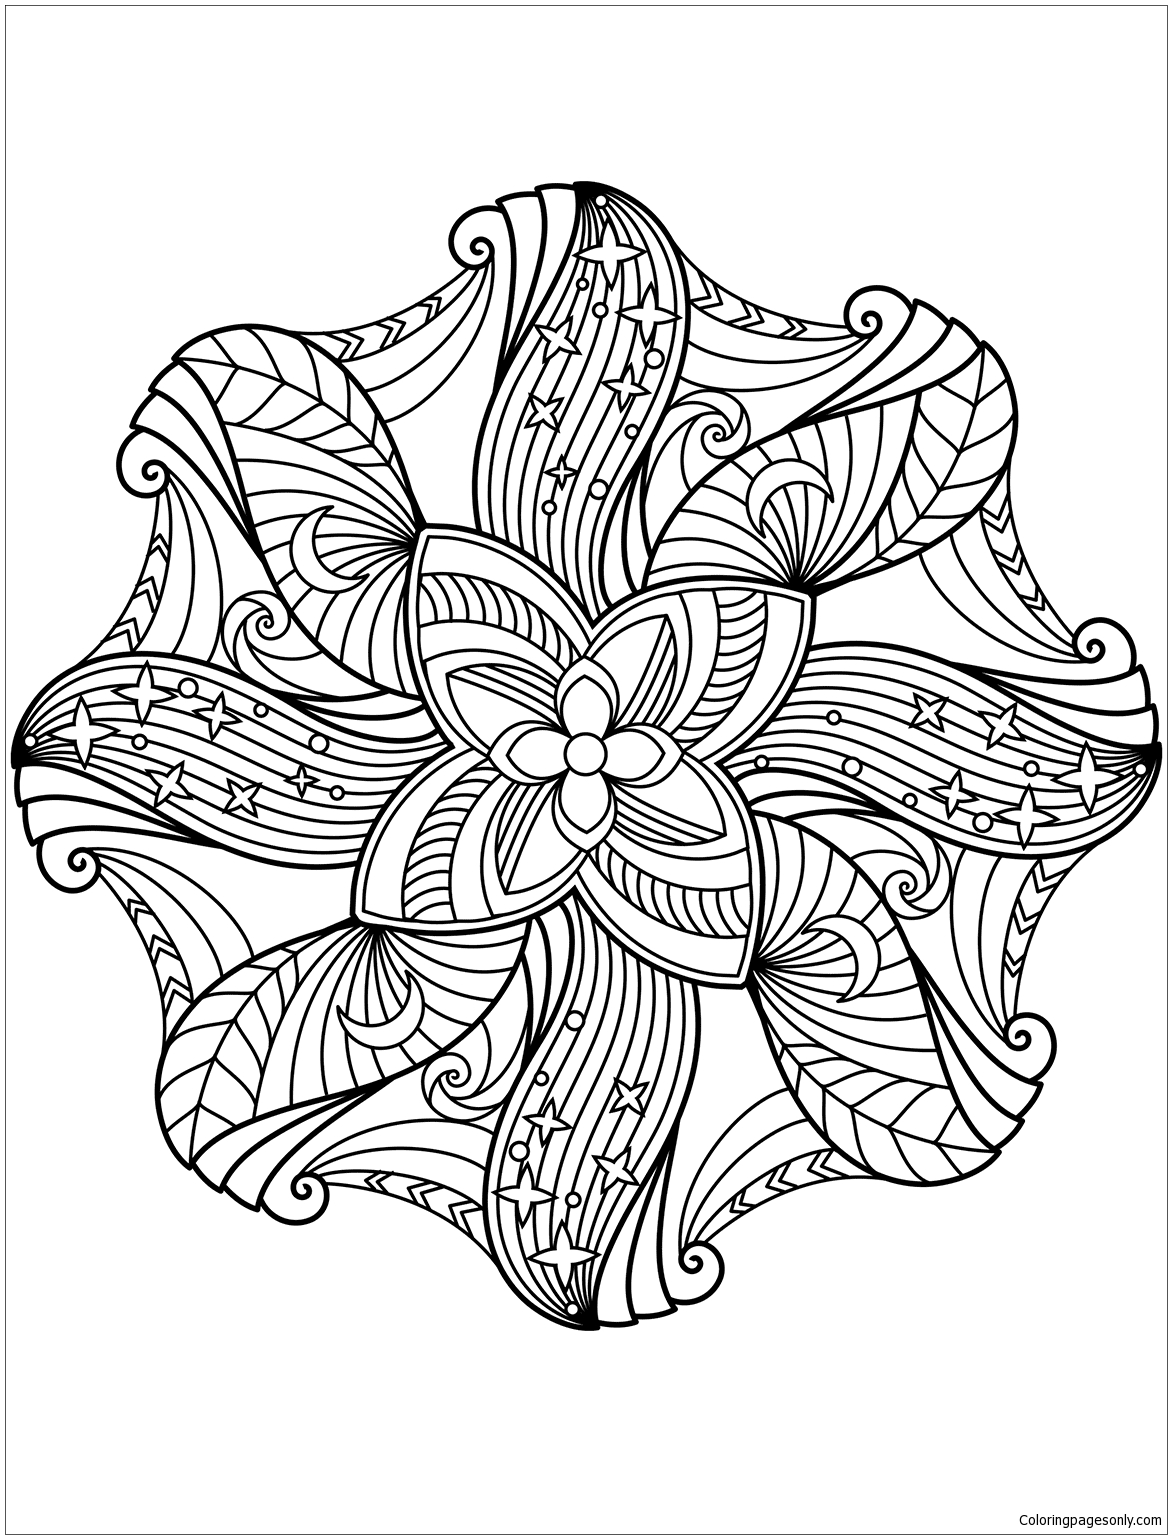 Flower Mandala 1 Coloring Page - Free Coloring Pages Online